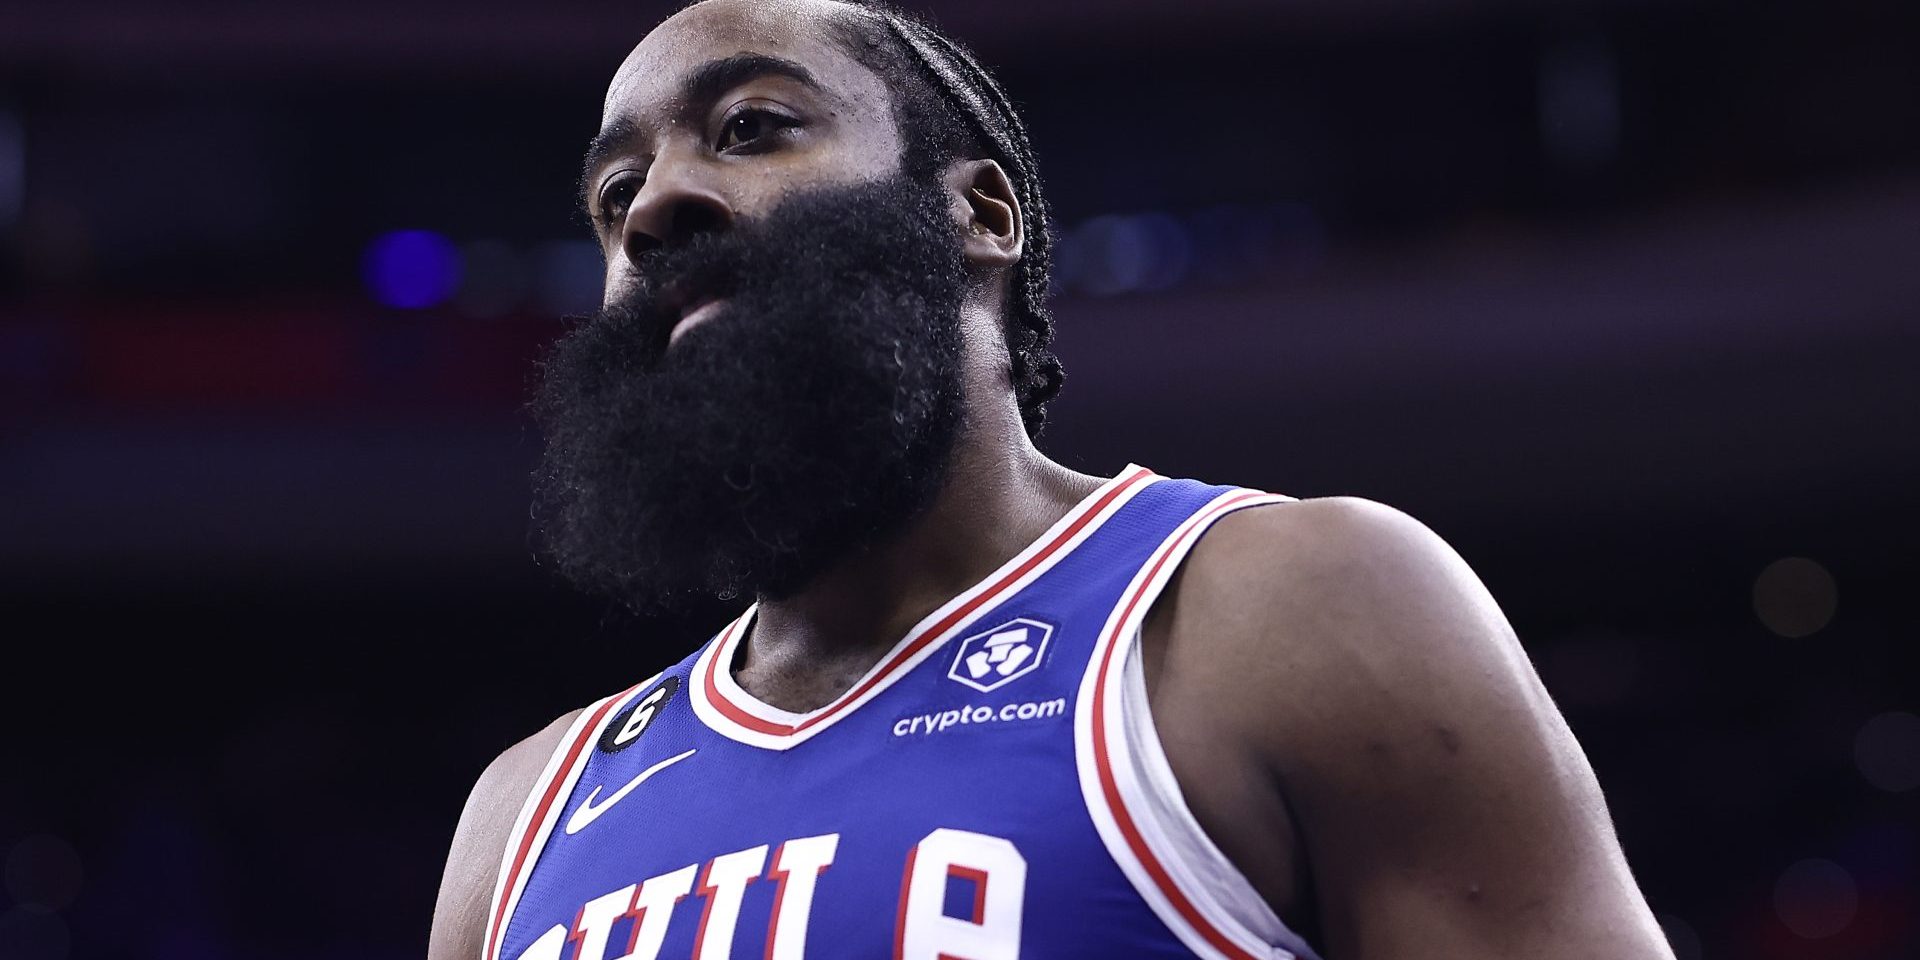 PHILADELPHIA, PENNSYLVANIA - DECEMBER 13: James Harden #1 of the Philadelphia 76ers reacts during the second quarter against the Sacramento Kings  at Wells Fargo Center on December 13, 2022 in Philadelphia, Pennsylvania. NOTE TO USER: User expressly acknowledges and agrees that, by downloading and or using this photograph, User is consenting to the terms and conditions of the Getty Images License Agreement. (Photo by Tim Nwachukwu/Getty Images)